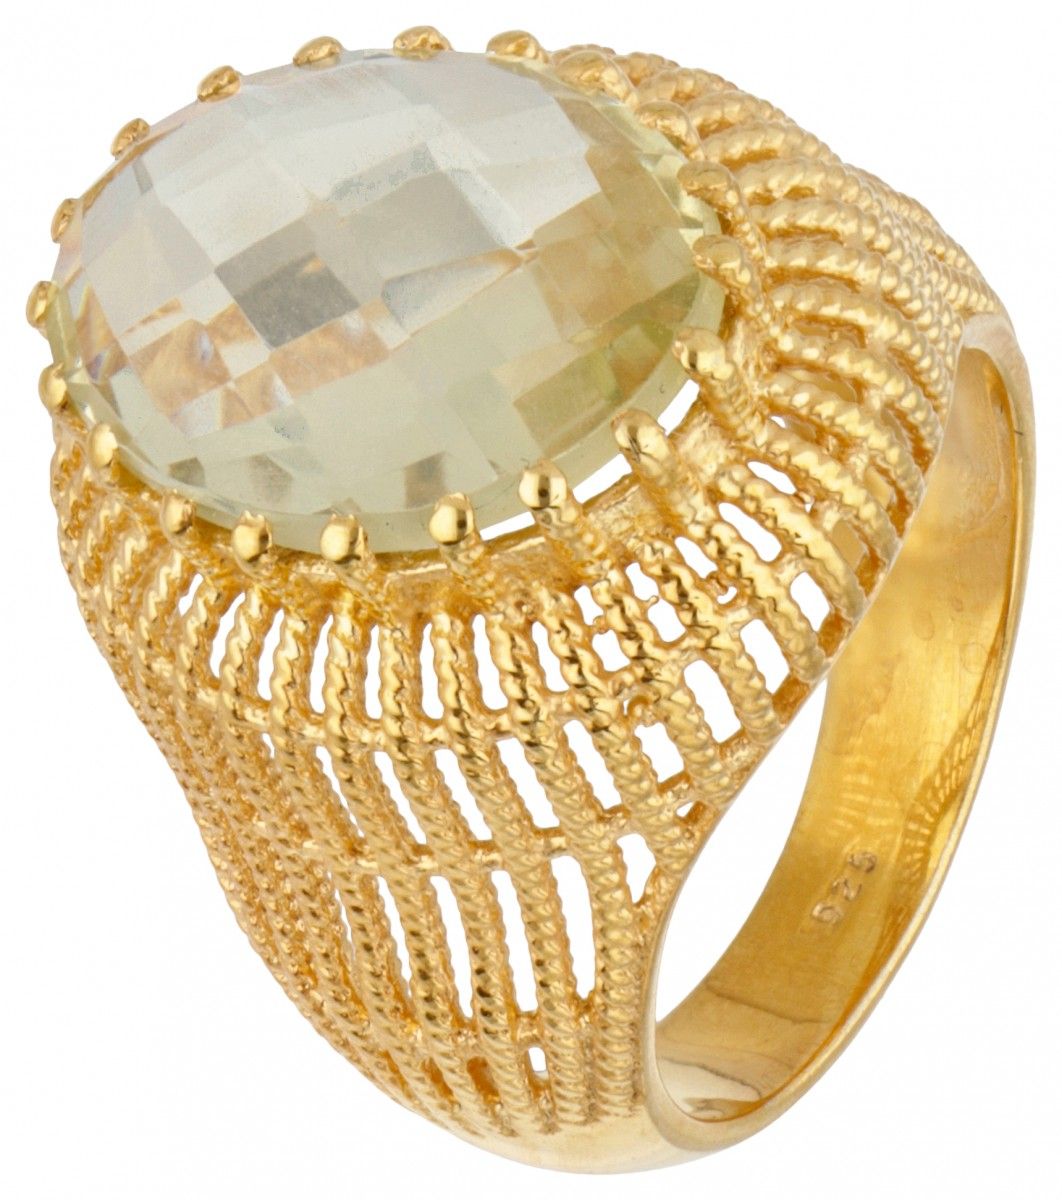 Gold plated silver ring set with approx. 5.98 ct. Lemon quartz - 925/1000. 印章：92&hellip;